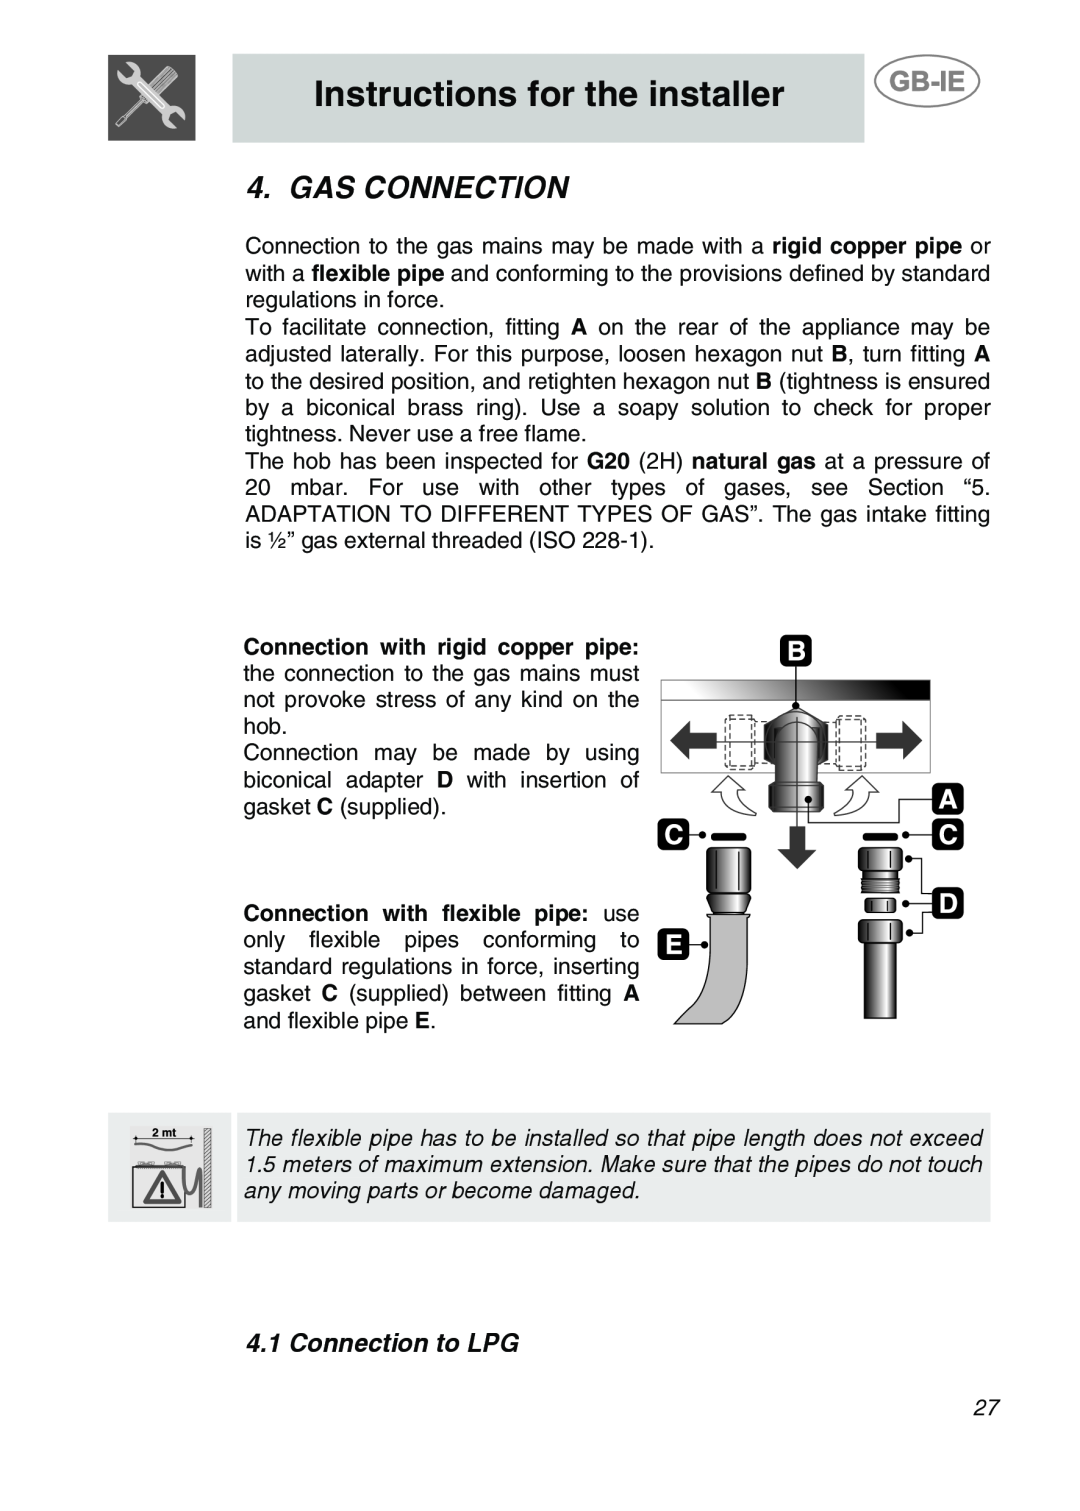 Smeg SDR60XG3 manual Gas Connection, 4.1Connection to LPG, Instructions for the installer 